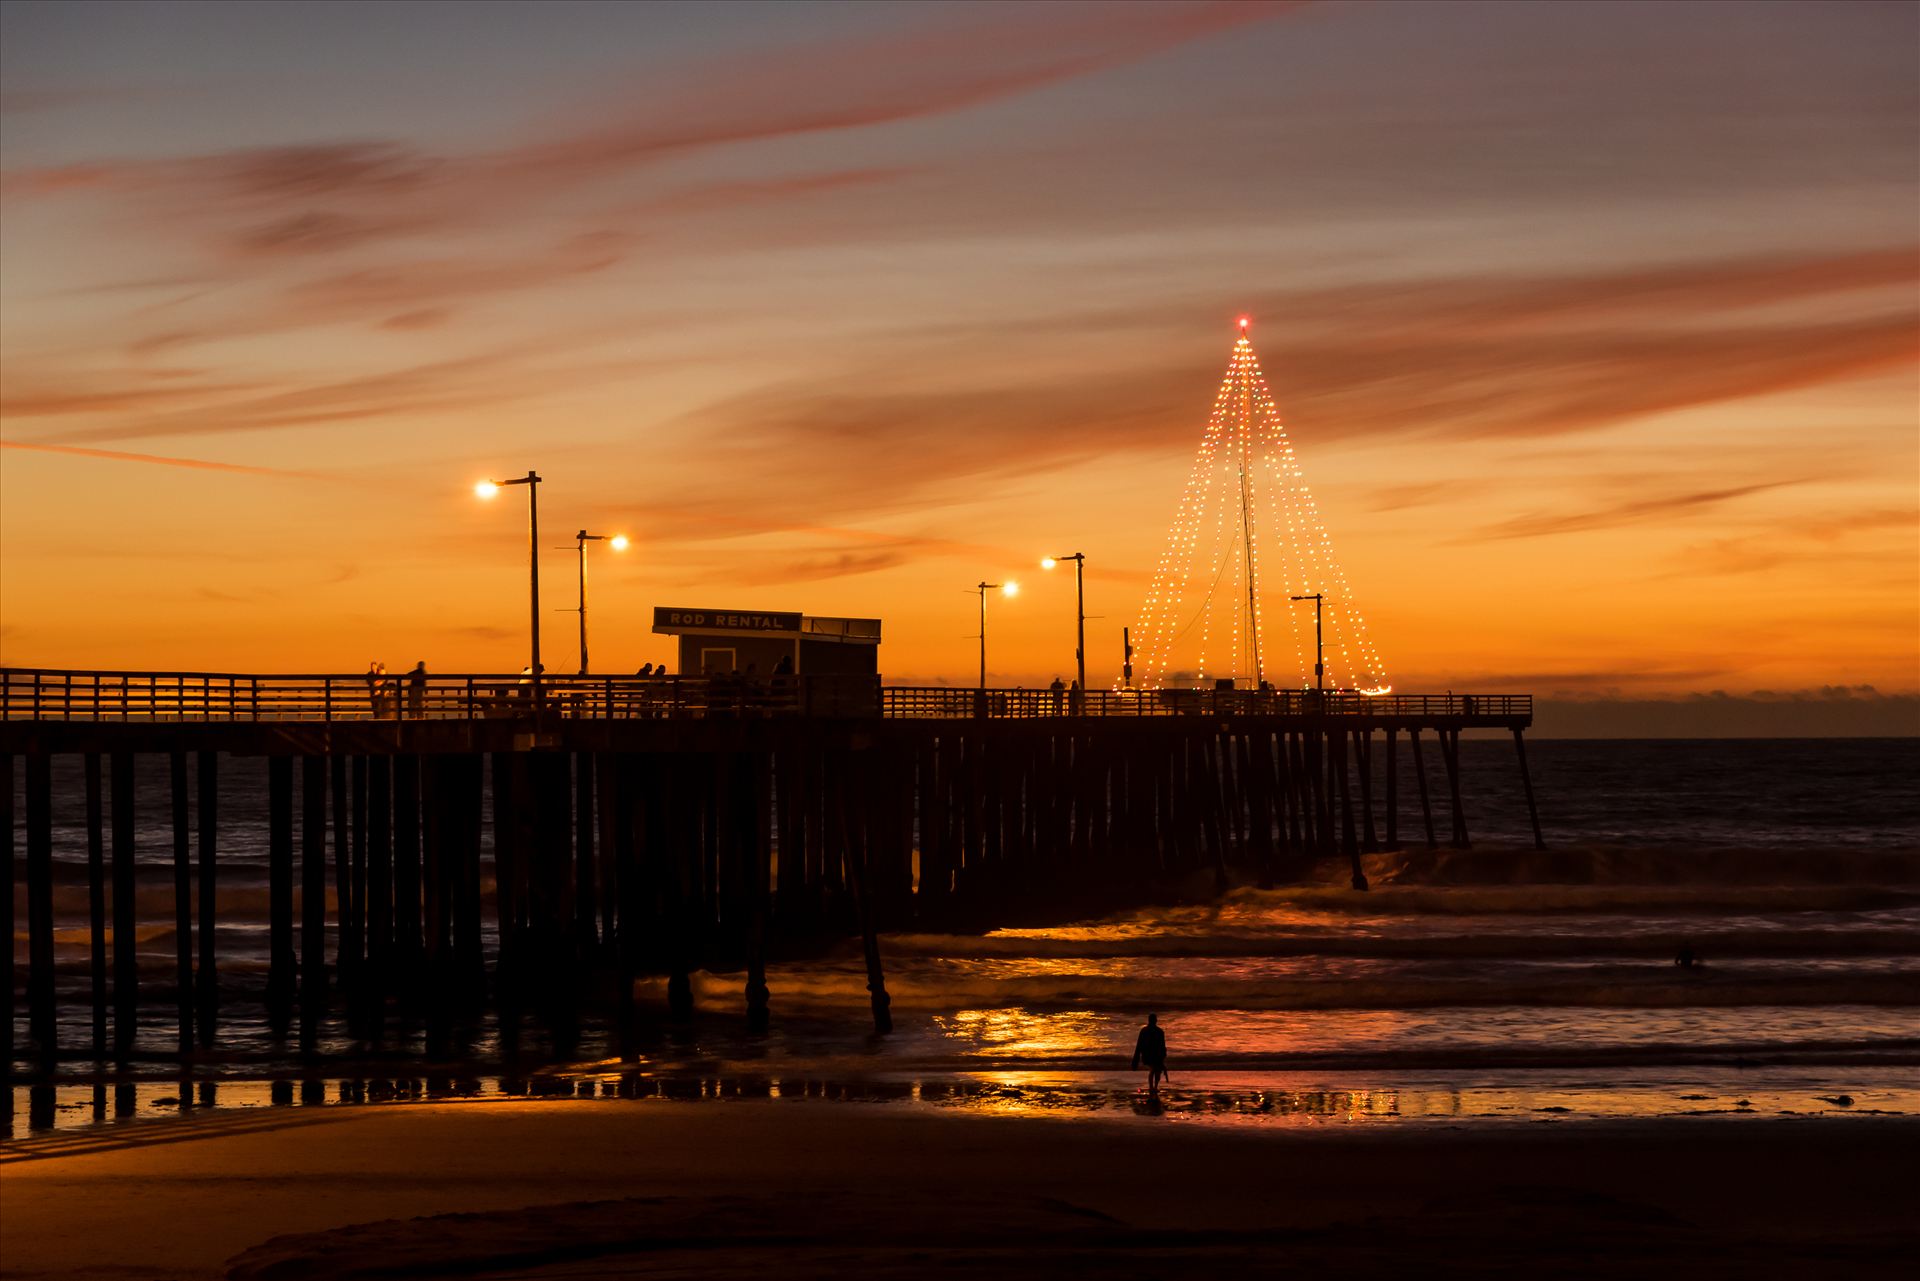 Happy Holidays Pismo.jpg Christmas at the Pismo Beach Pier in California. Christmas Tree Lights. by Sarah Williams